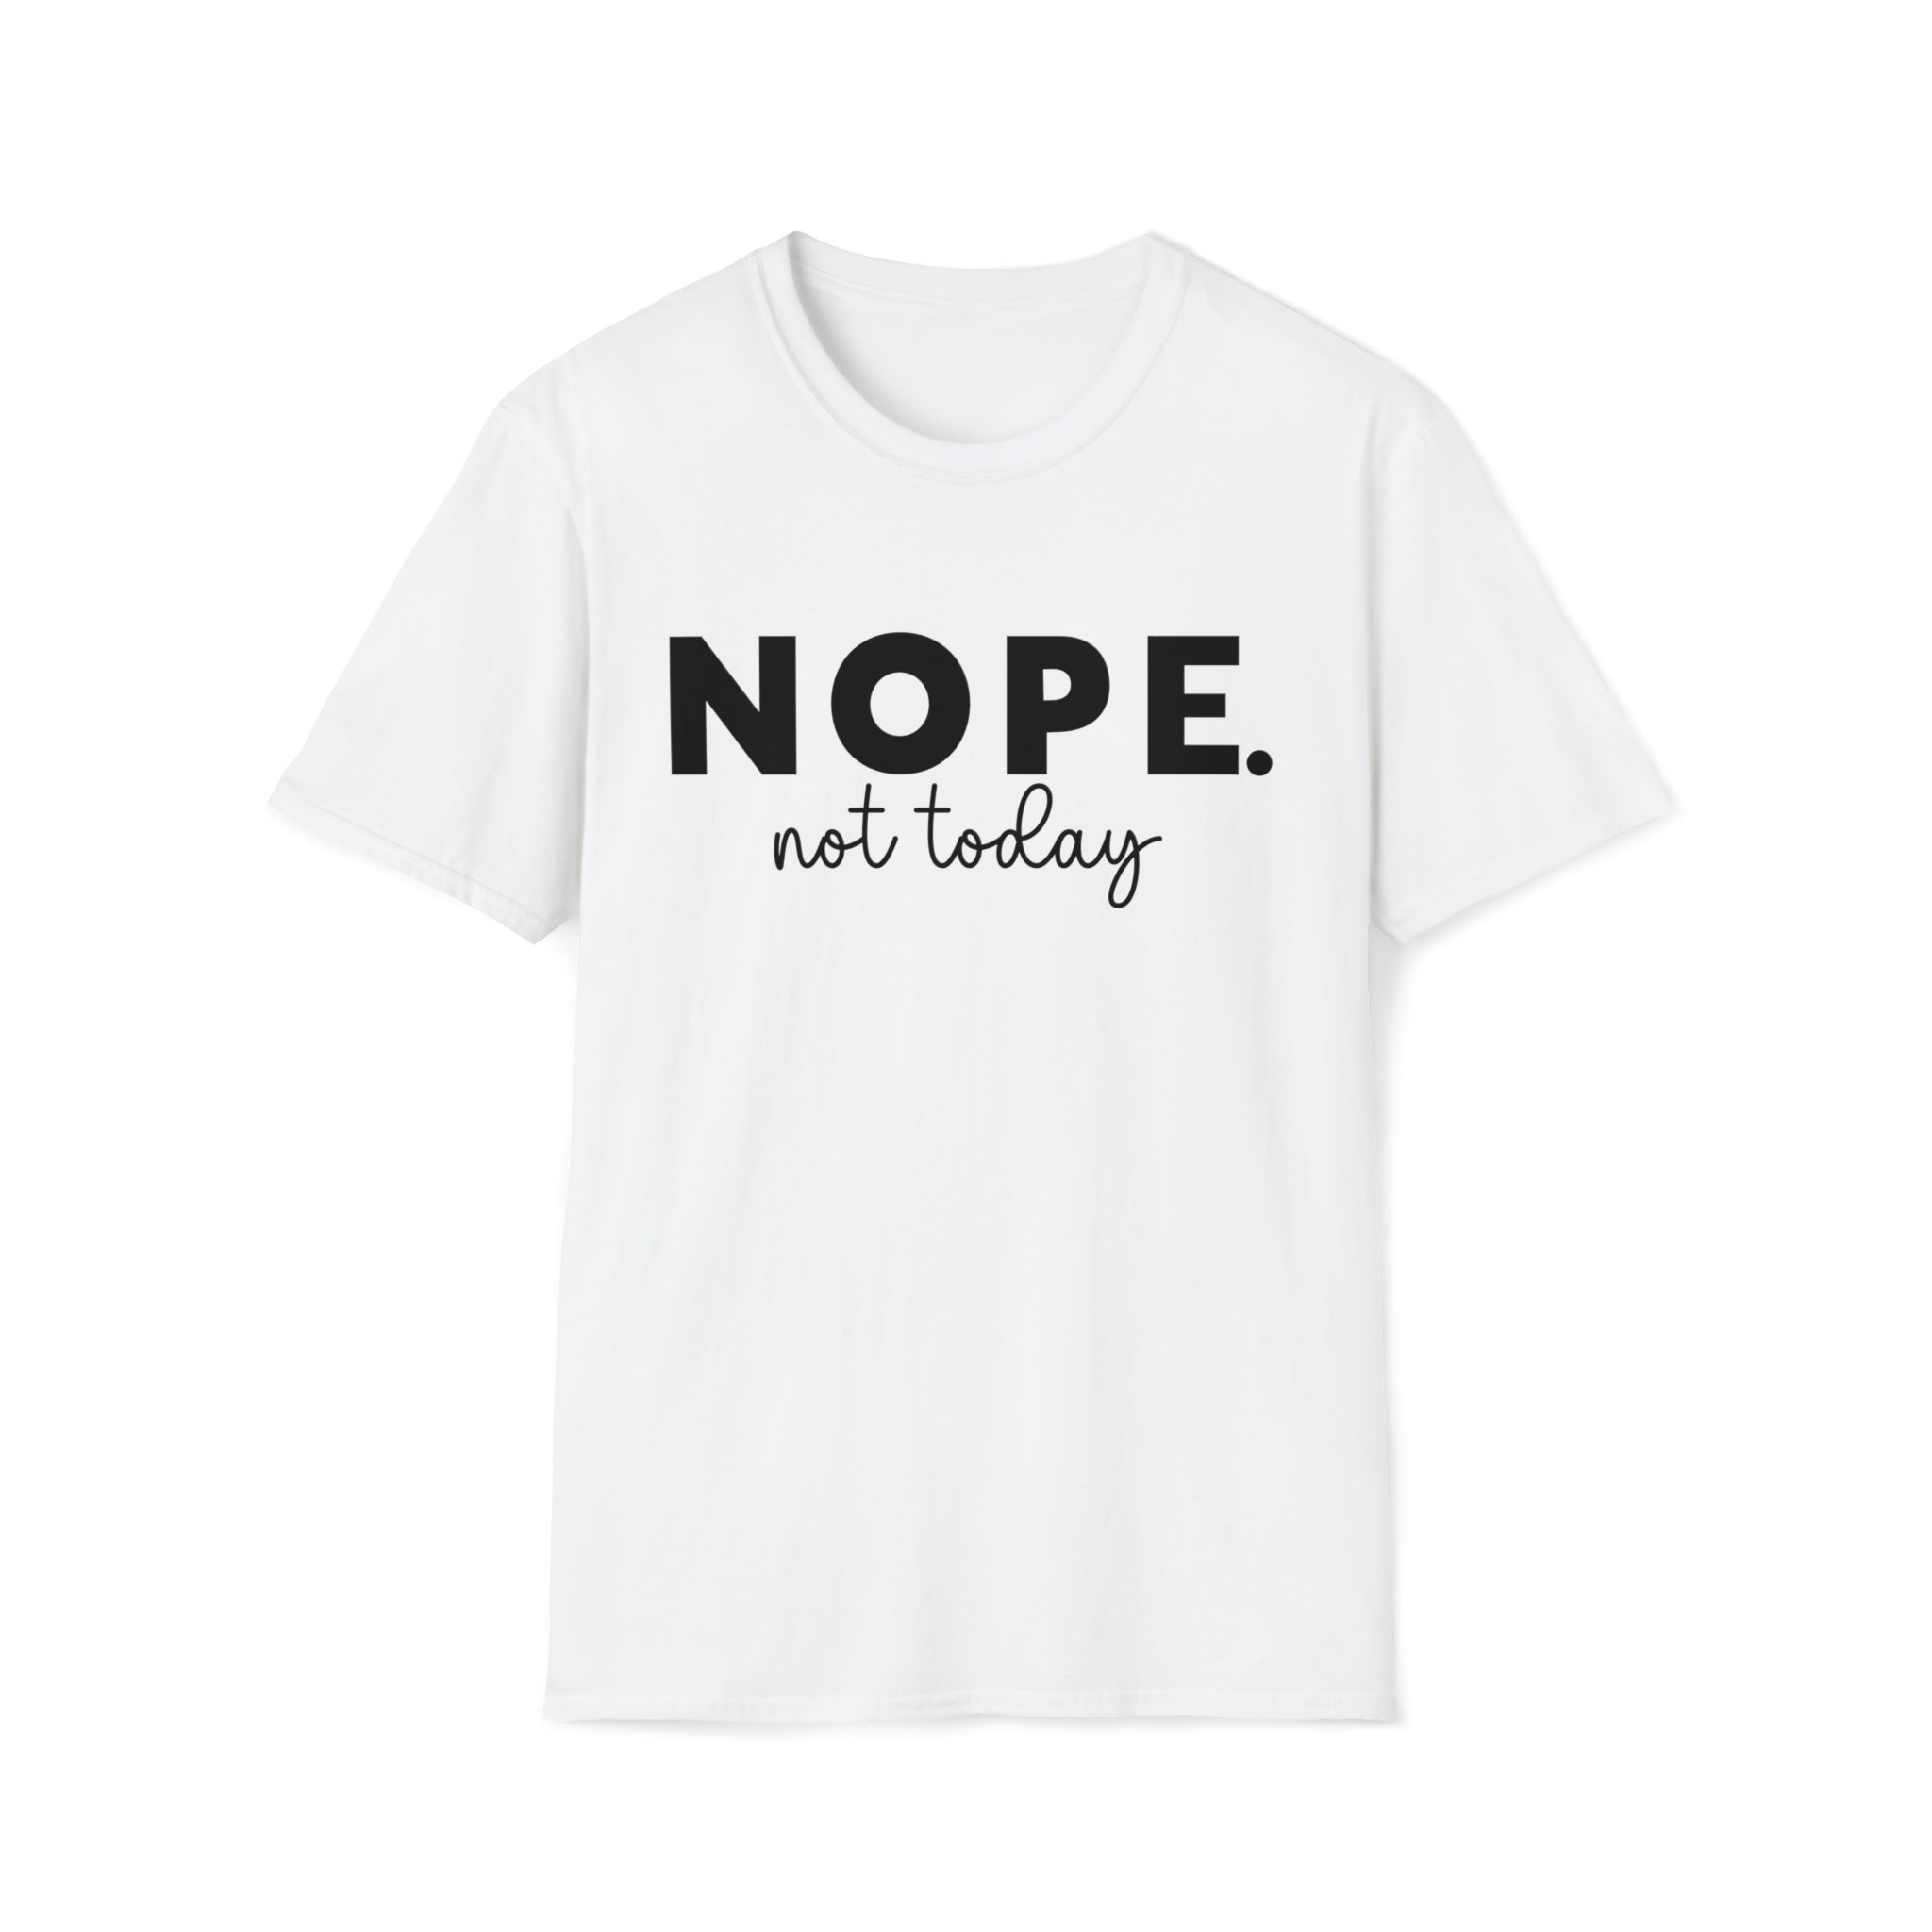 T - Shi and Today, Nope Nope Tomorrow Not – Either Tshirt Not Boldly Sideways Front Back